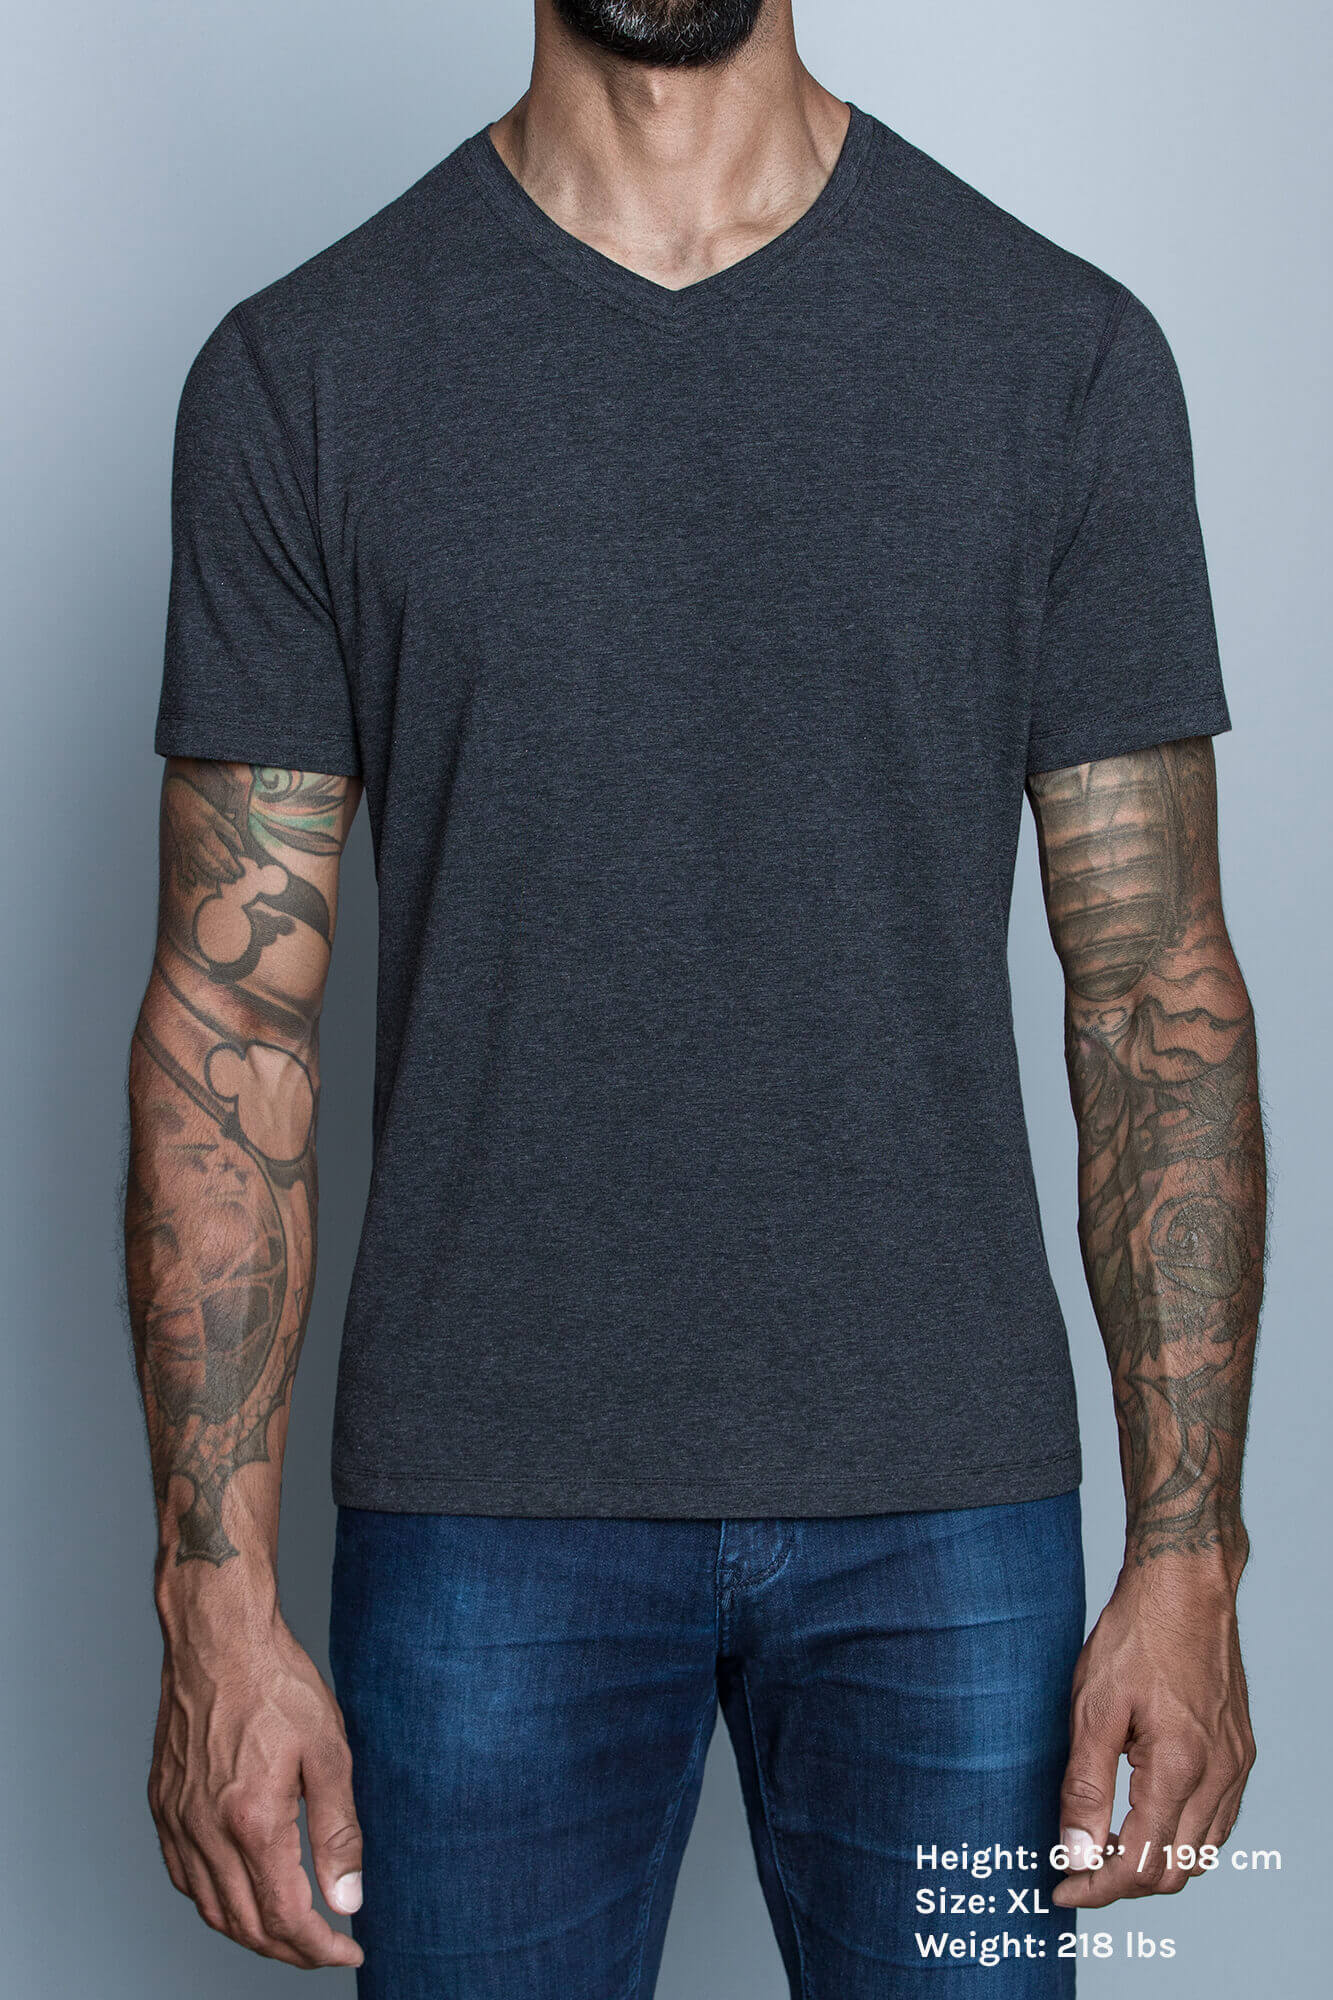 The Navas Lab Drake V2 microstripe tall tee v-neck in dark grey. Long T-shirt for tall guys for everyday use.